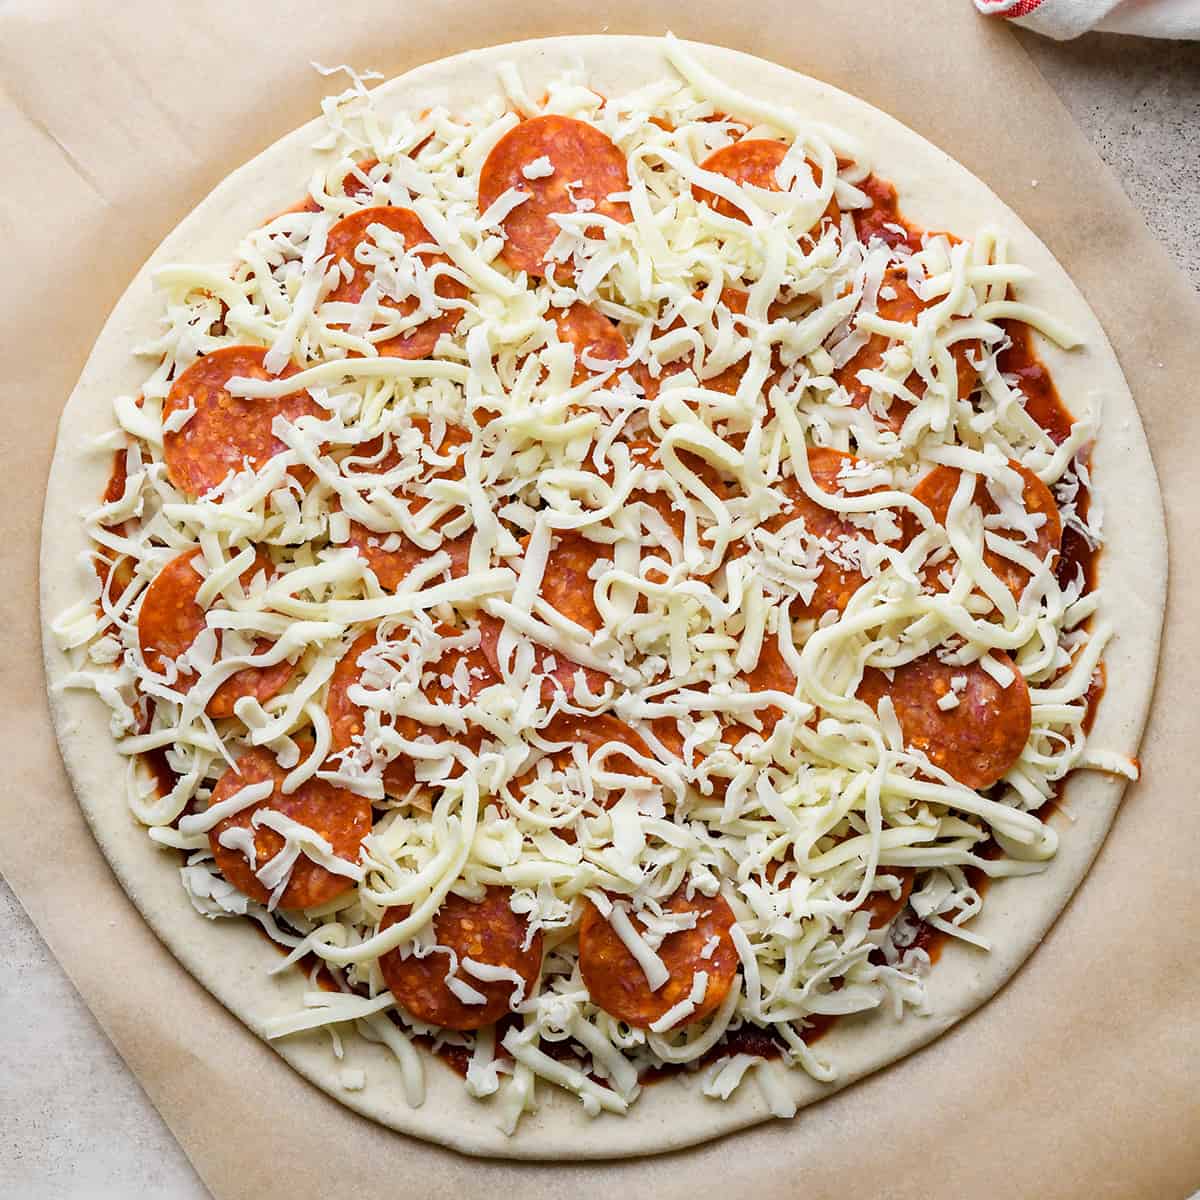 How to Make Pepperoni Pizza - cheese on top of pepeproni